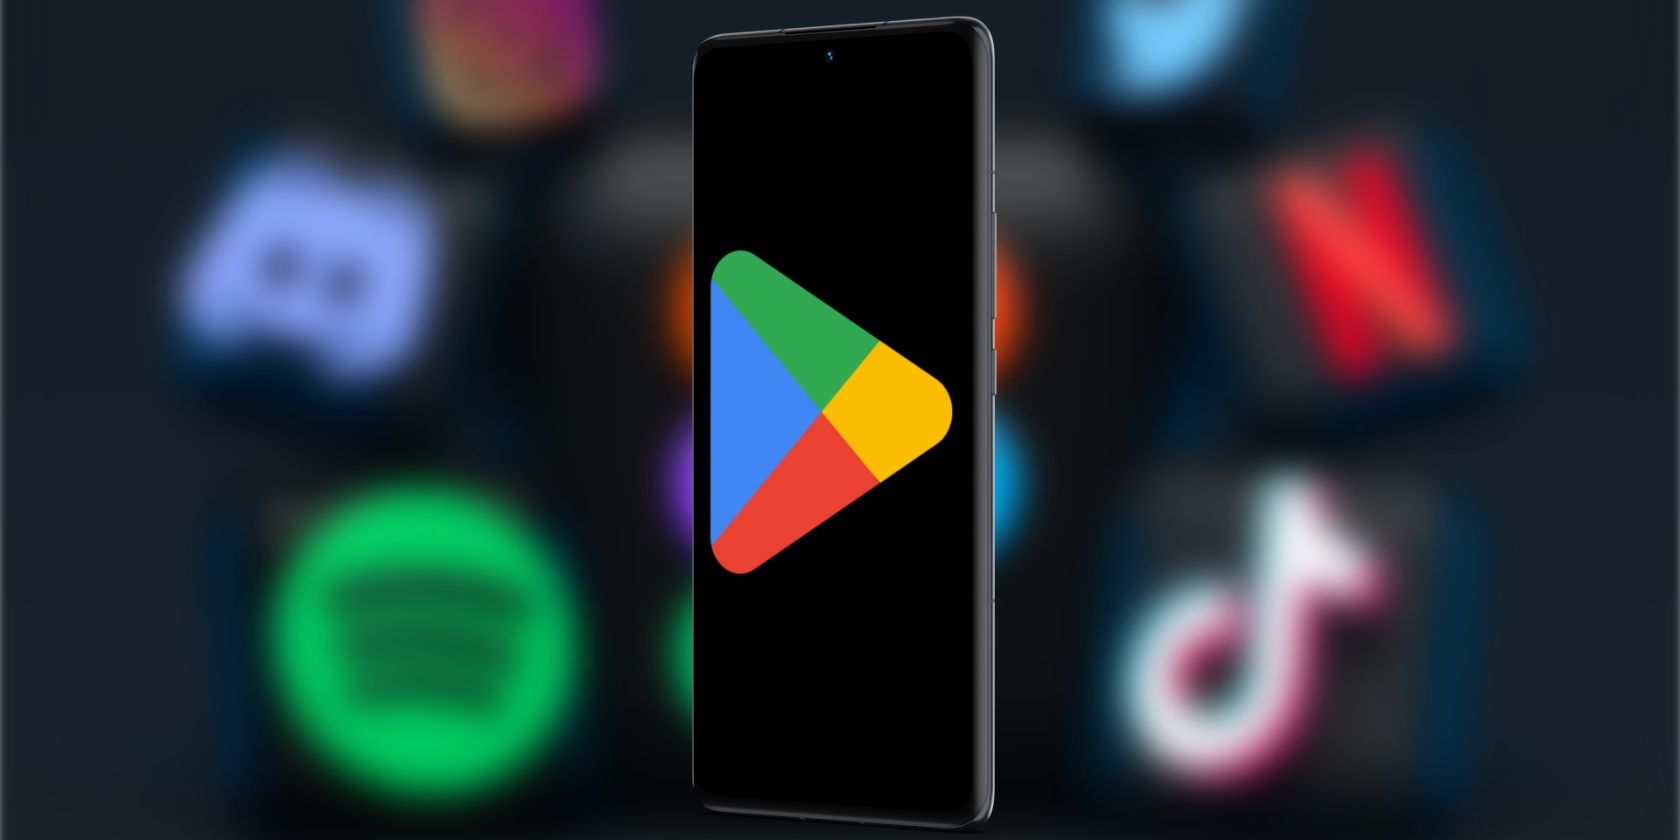 Play Store logo on an Android phone with app icons in the background